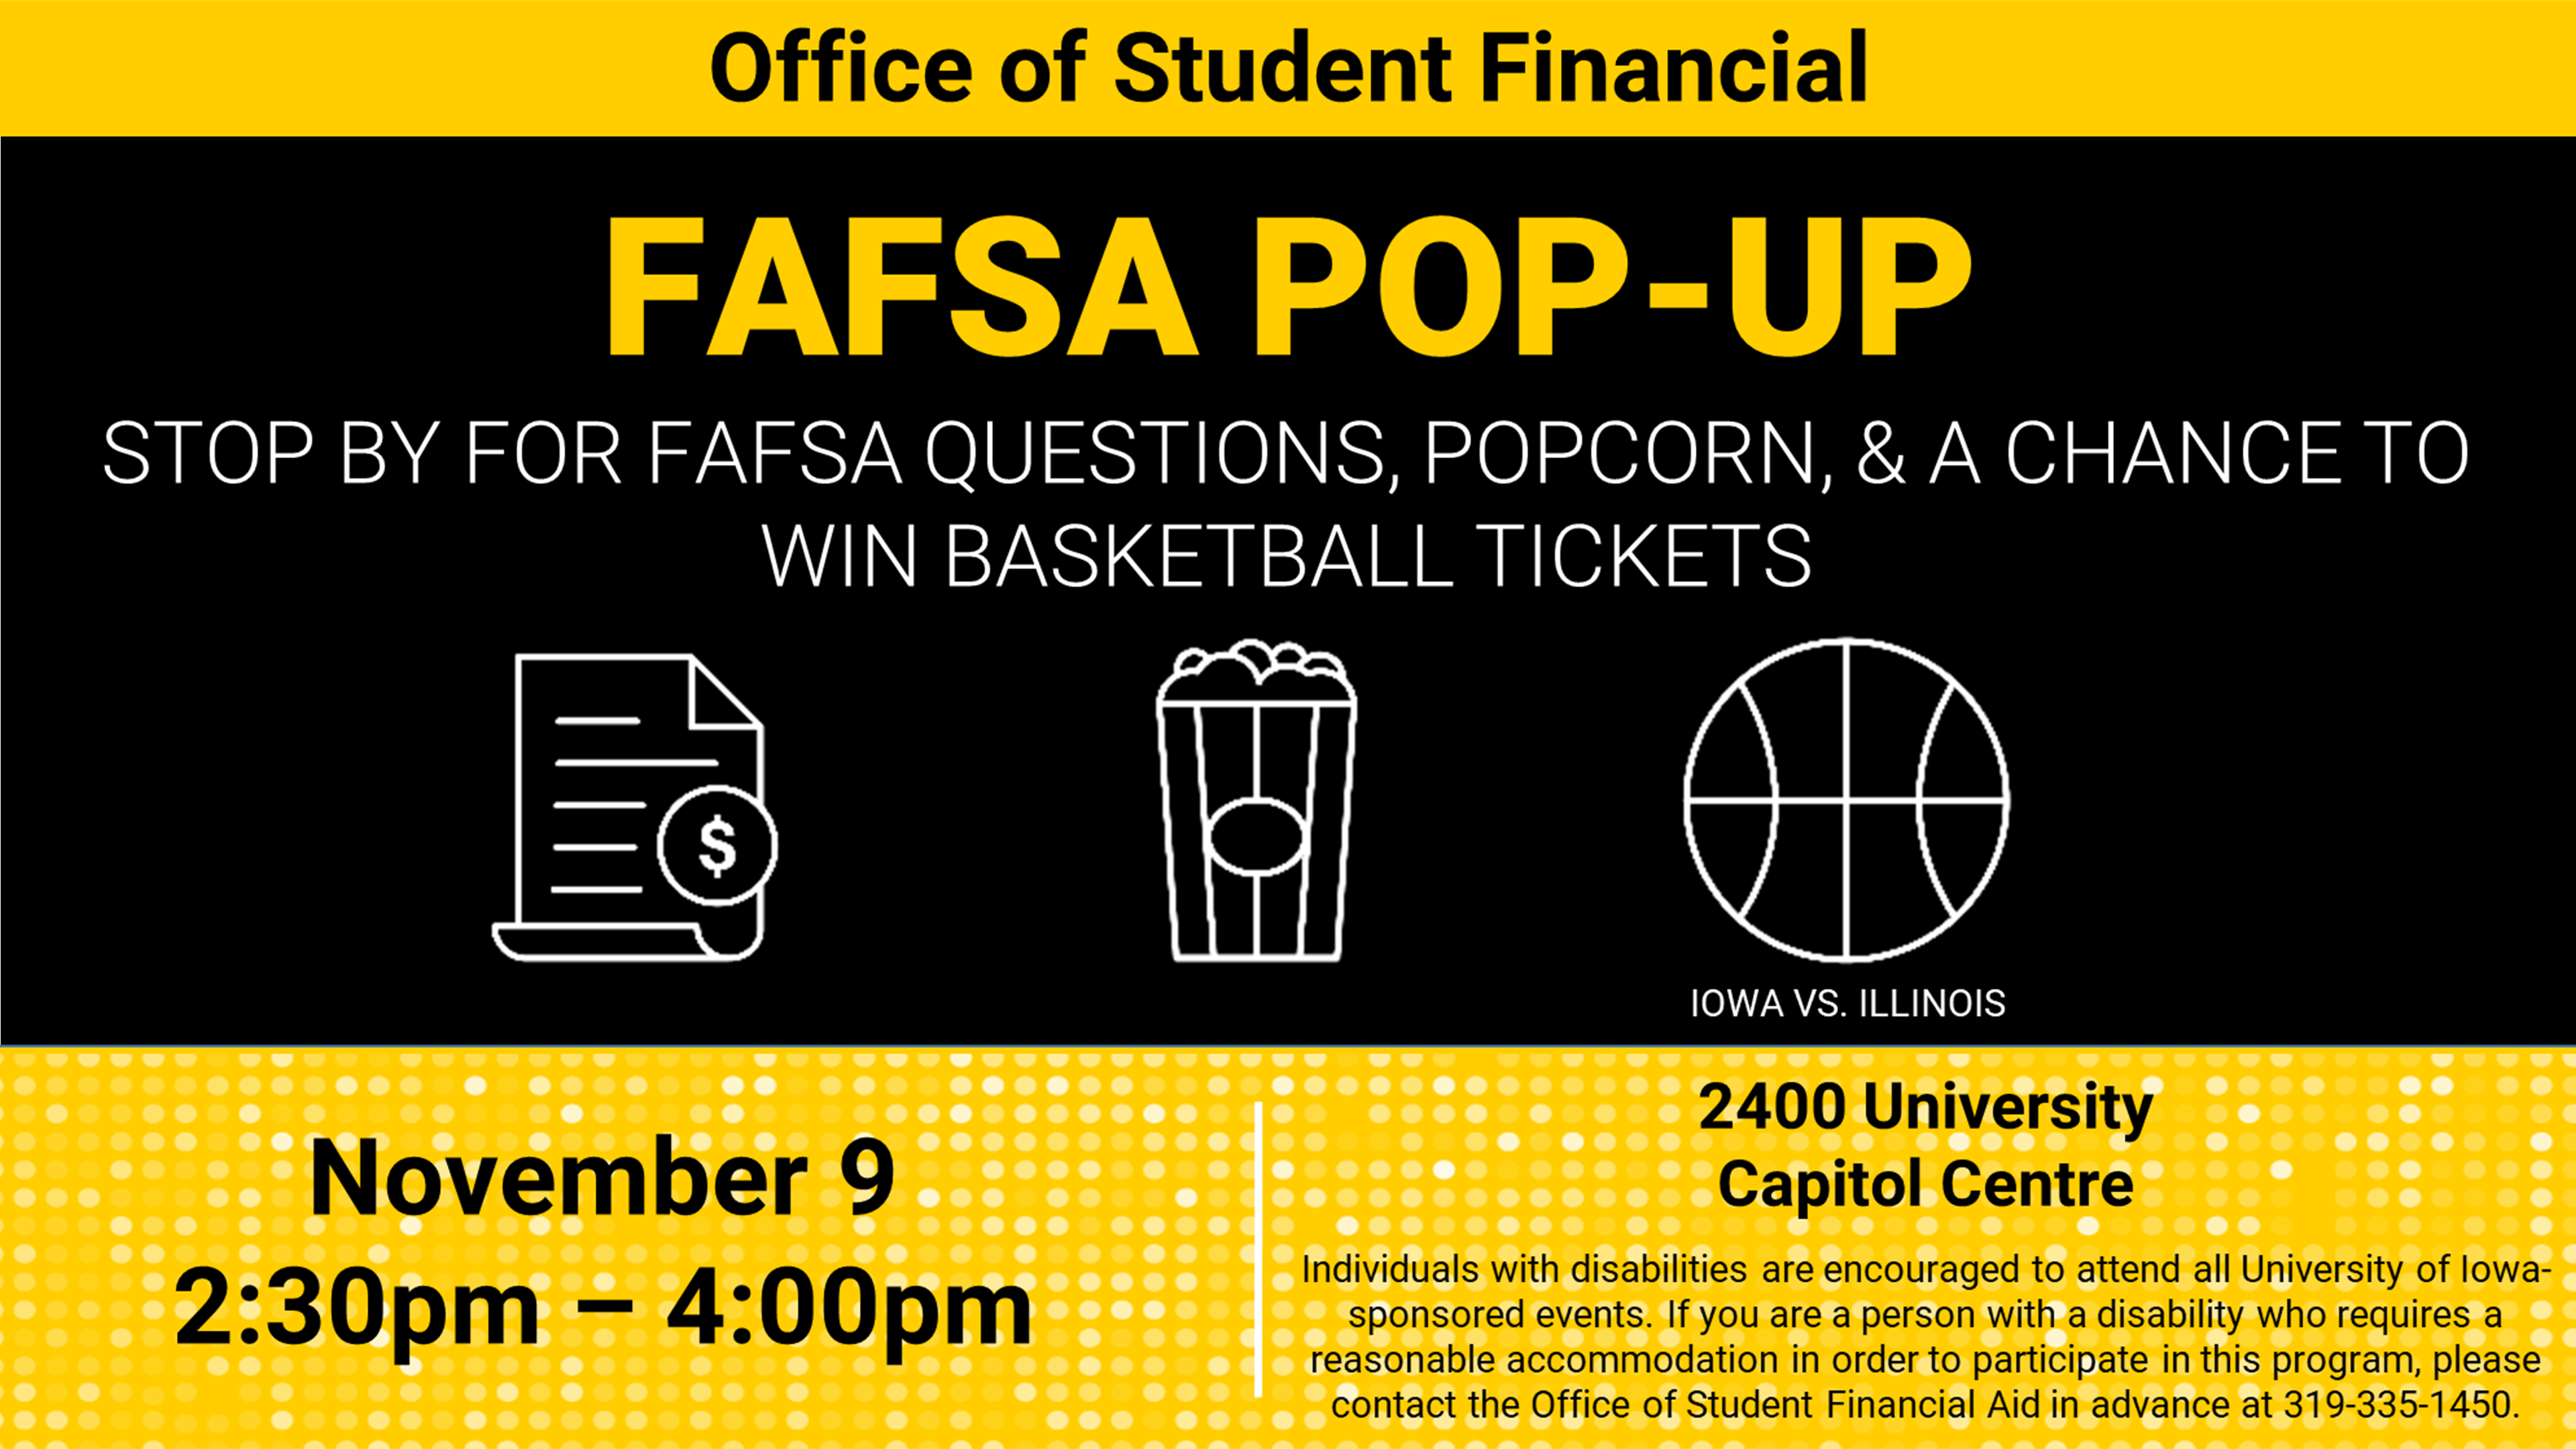 The office of student financial aid presents FAFSA pop-up stop by for FASFA questions popcorn and a chance to win basketball tickets. Event on November 9 from 2 PM to 4 PM in 2400 University Capitol Center individuals with disabilities are encouraged to attend all University of Iowa sponsored events. If you were a person with a disability who requires a reasonable accommodation in order to participate in this program, please contact the office of student financial aid in advance at 319-335-1450